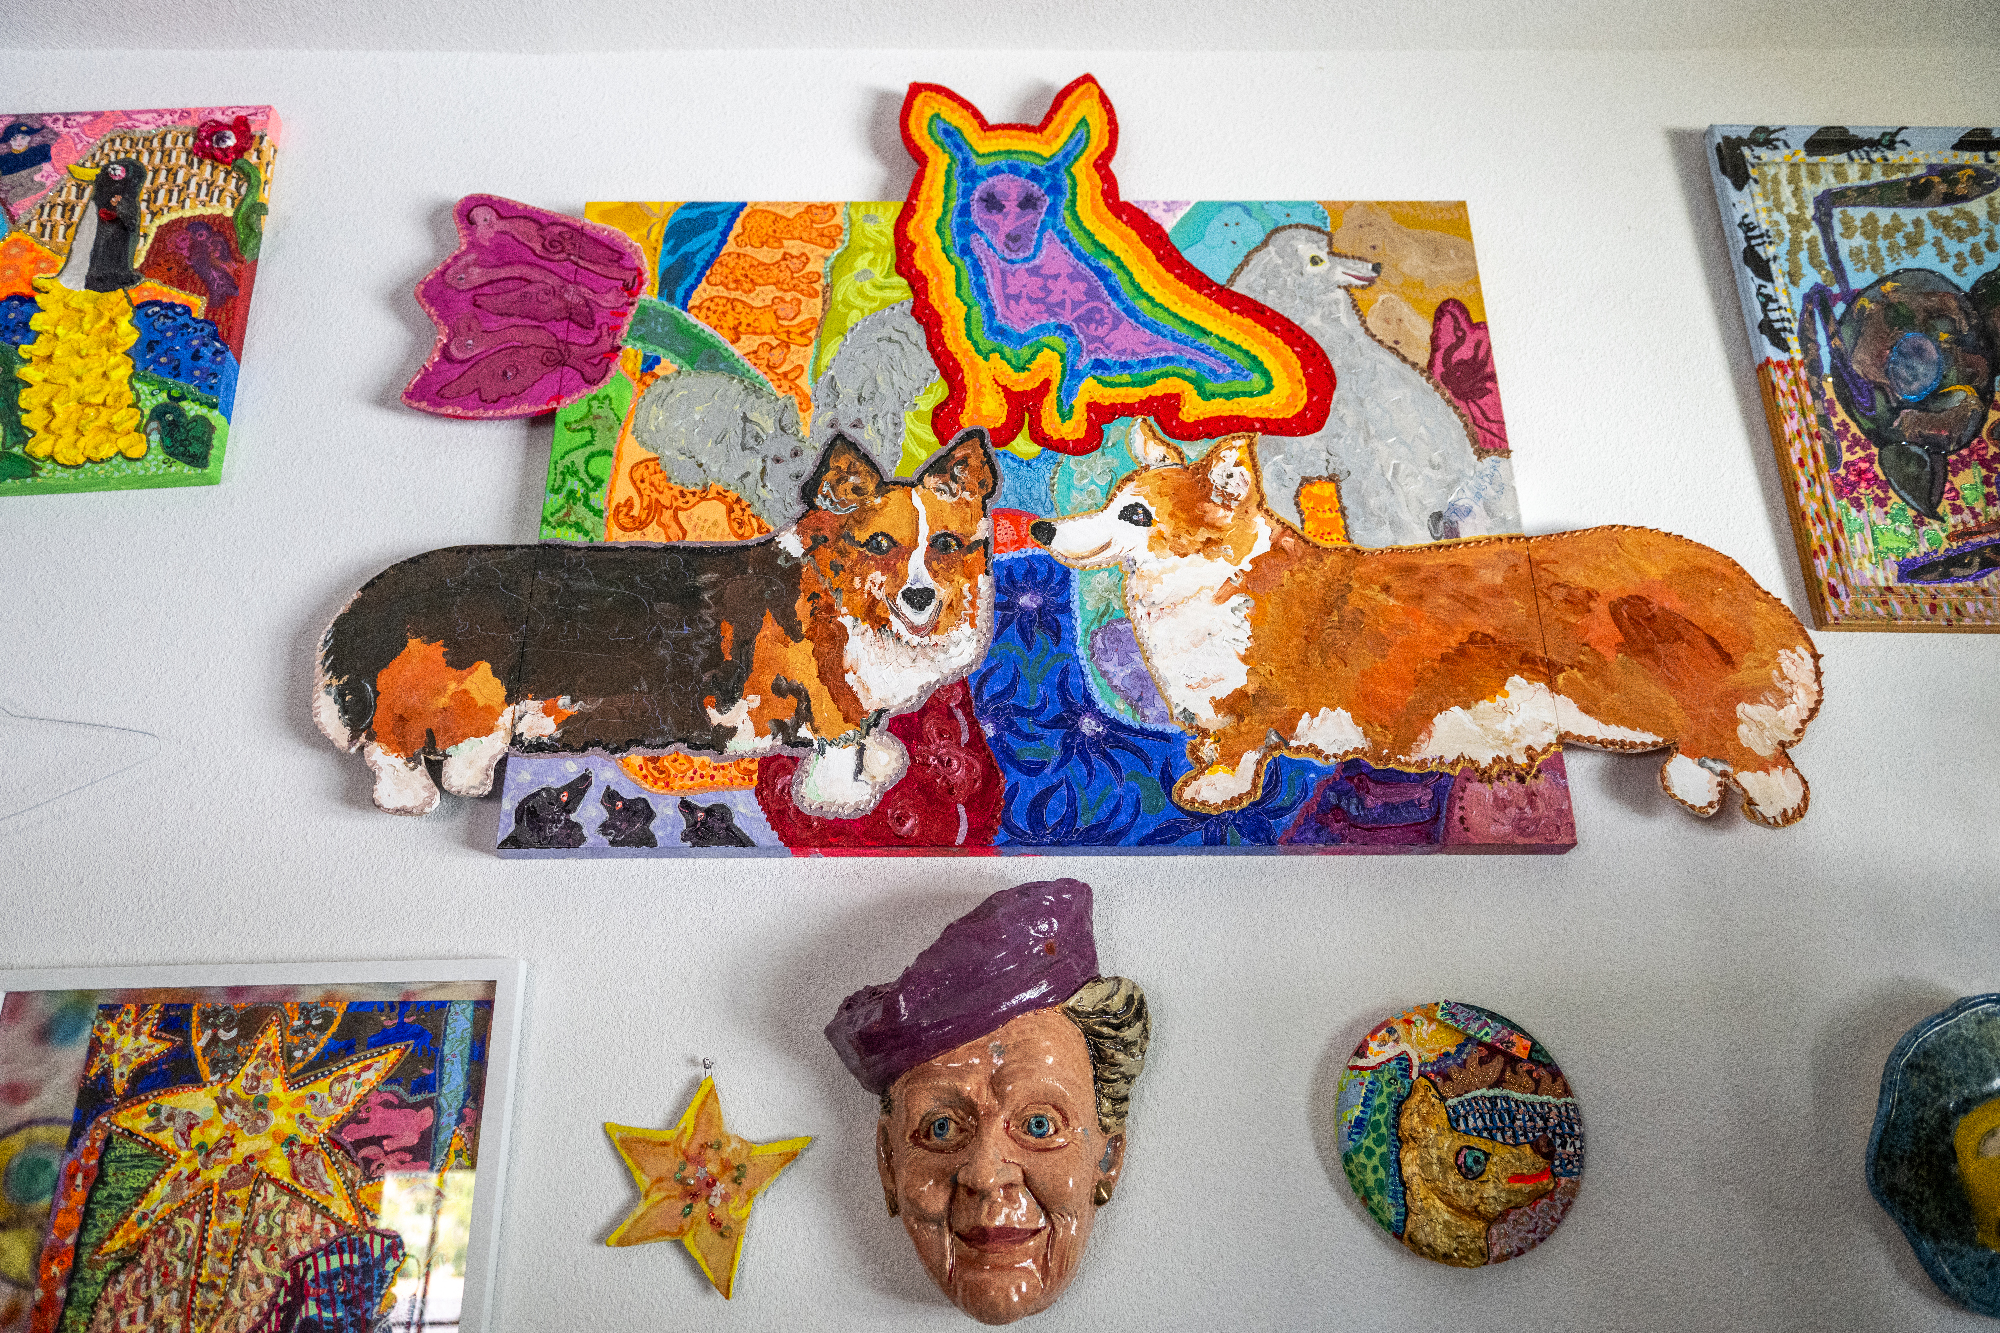 View of wall covered in colorful paintings and ceramic sculptures, including a painting of three Corgis with cut-out elements that extend dog bodies beyond rectangular canvas 